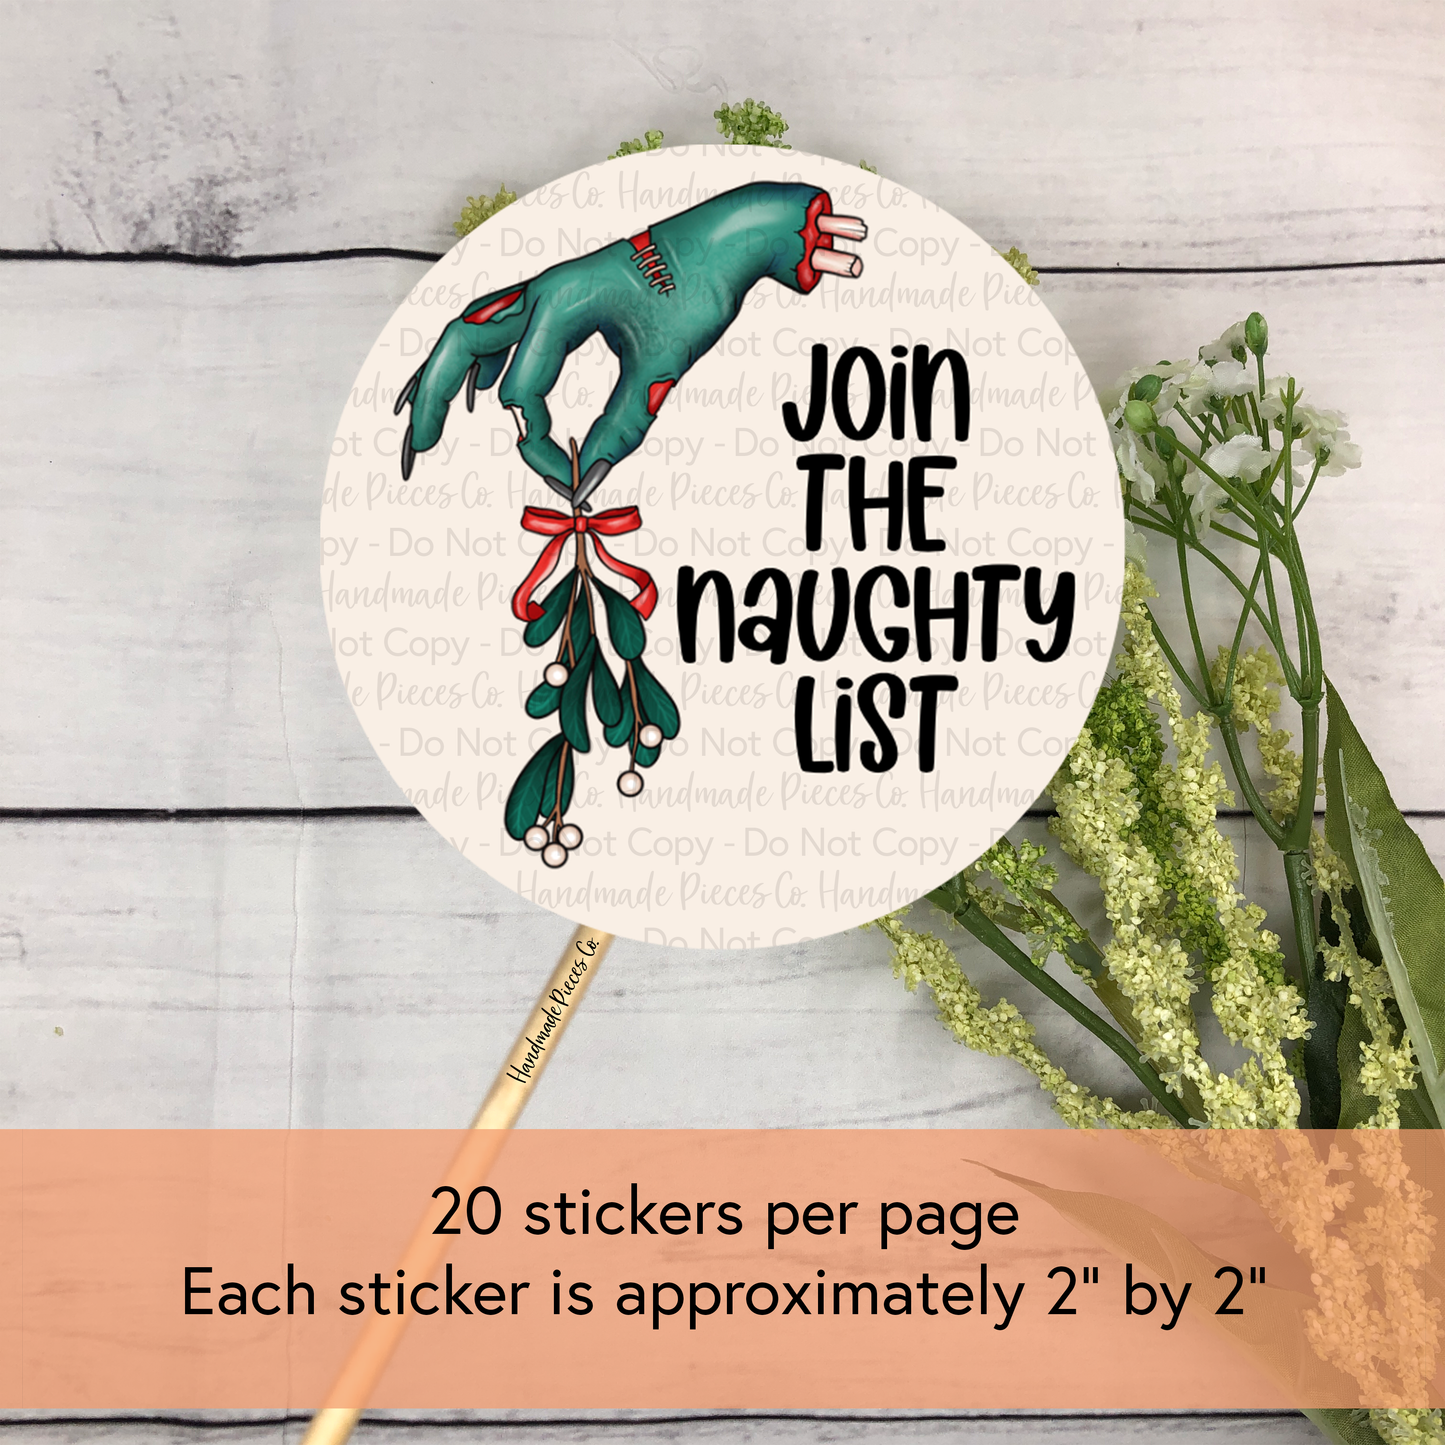 Join the Naughty List - Packaging Sticker, Merry Creepmas Theme